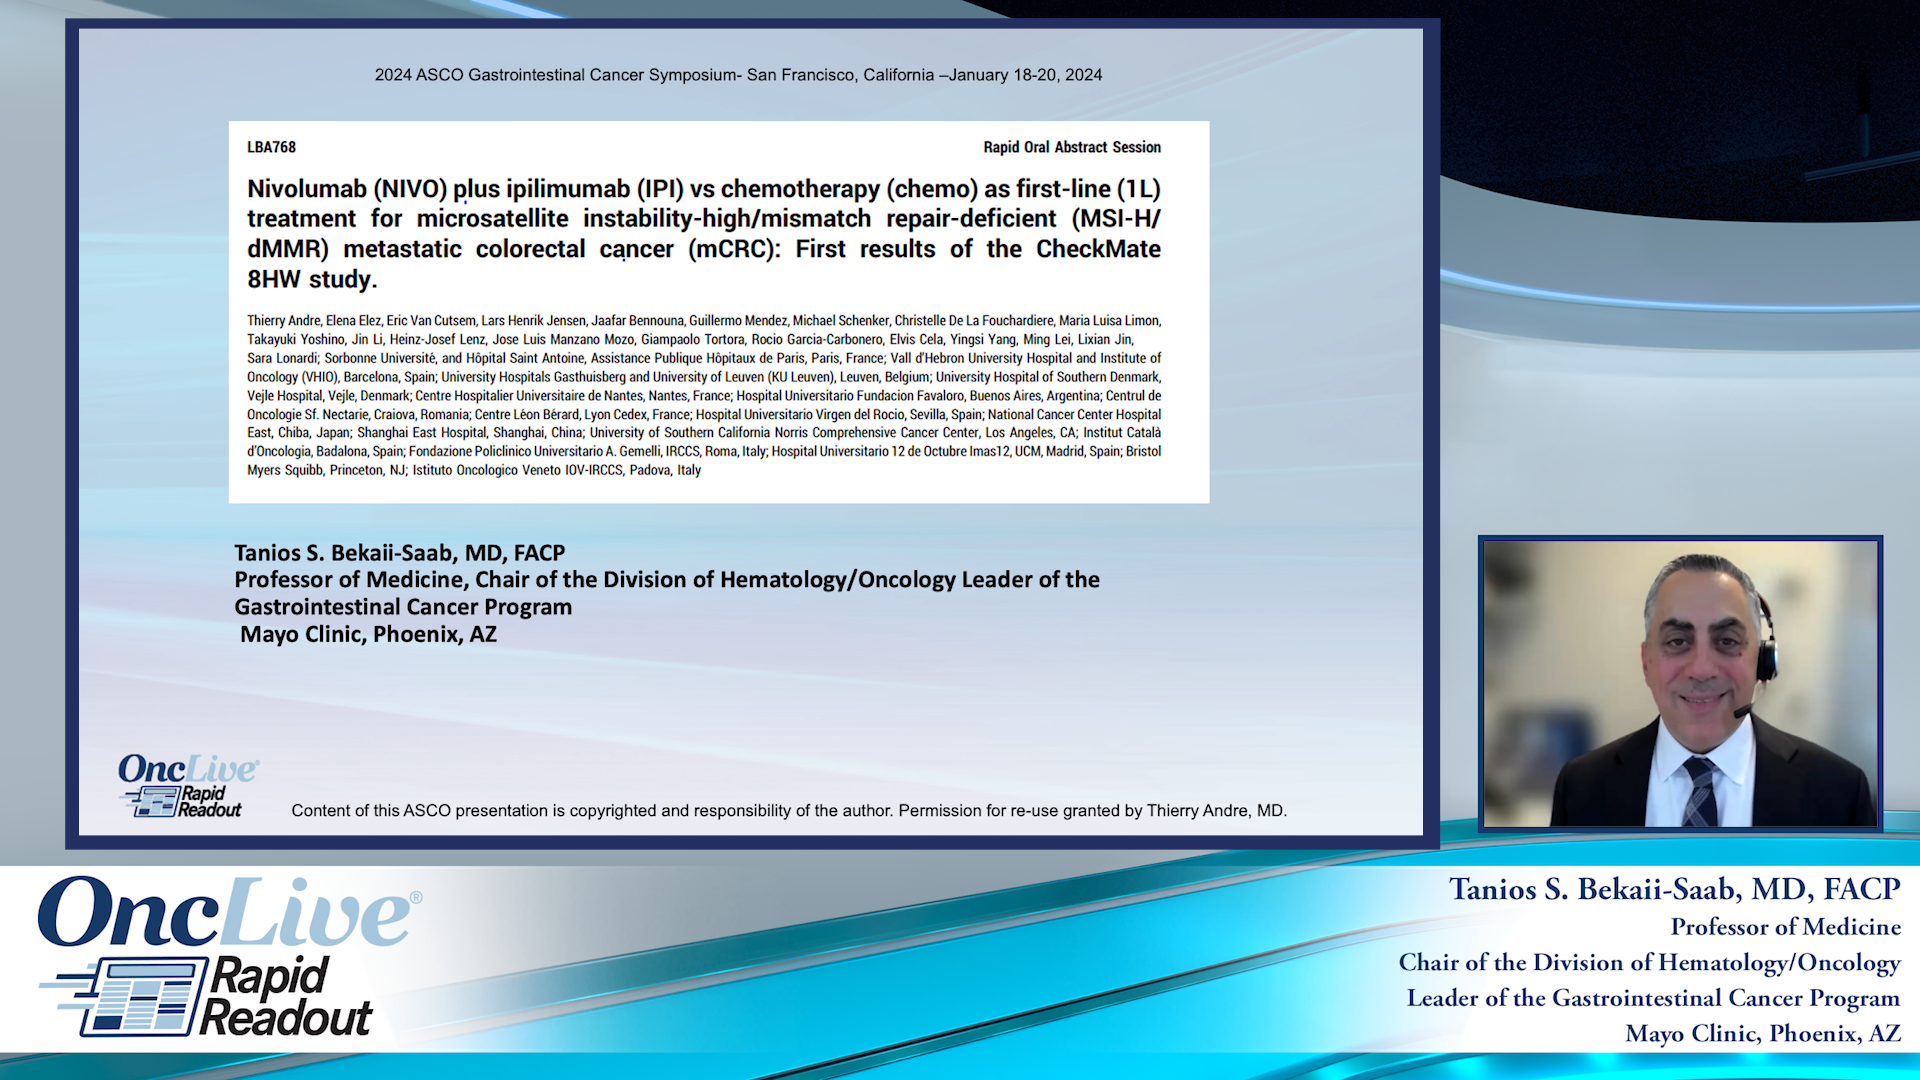 Nivolumab plus Ipilimumab vs Chemotherapy as First-line Treatment for Microsatellite Instability-High/Mismatch Repair Deficient Metastatic Colorectal Cancer: First Results of the CheckMate 8HW Study